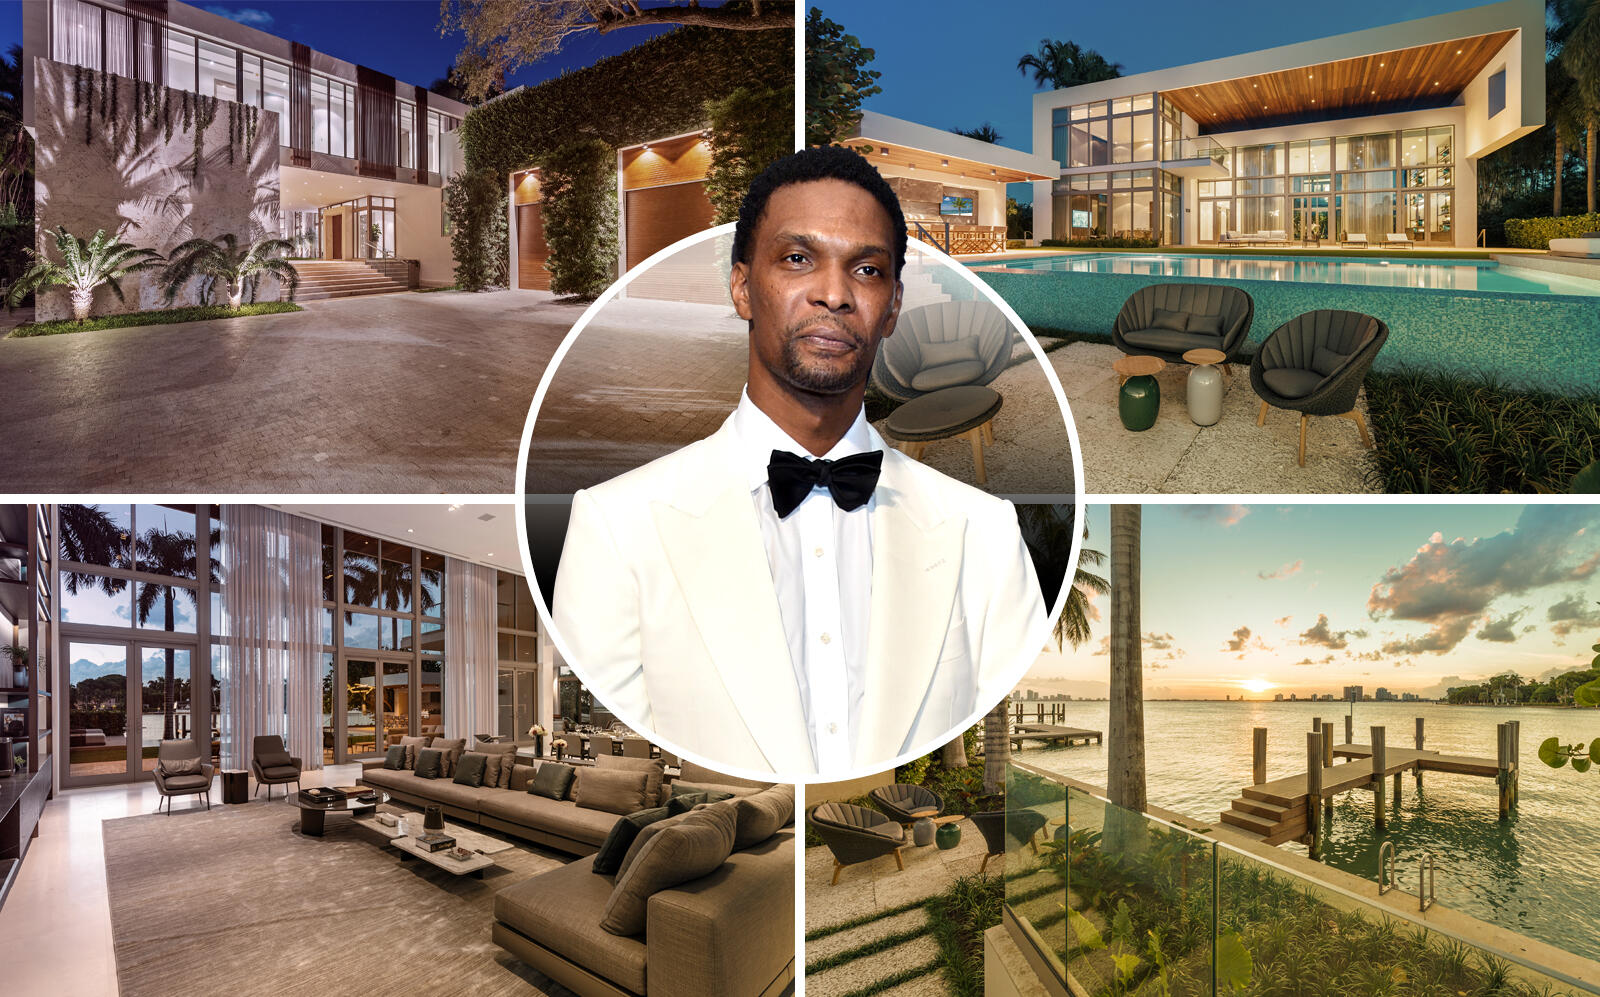 Chris Bosh and the property (Getty, The Waterfront Team)